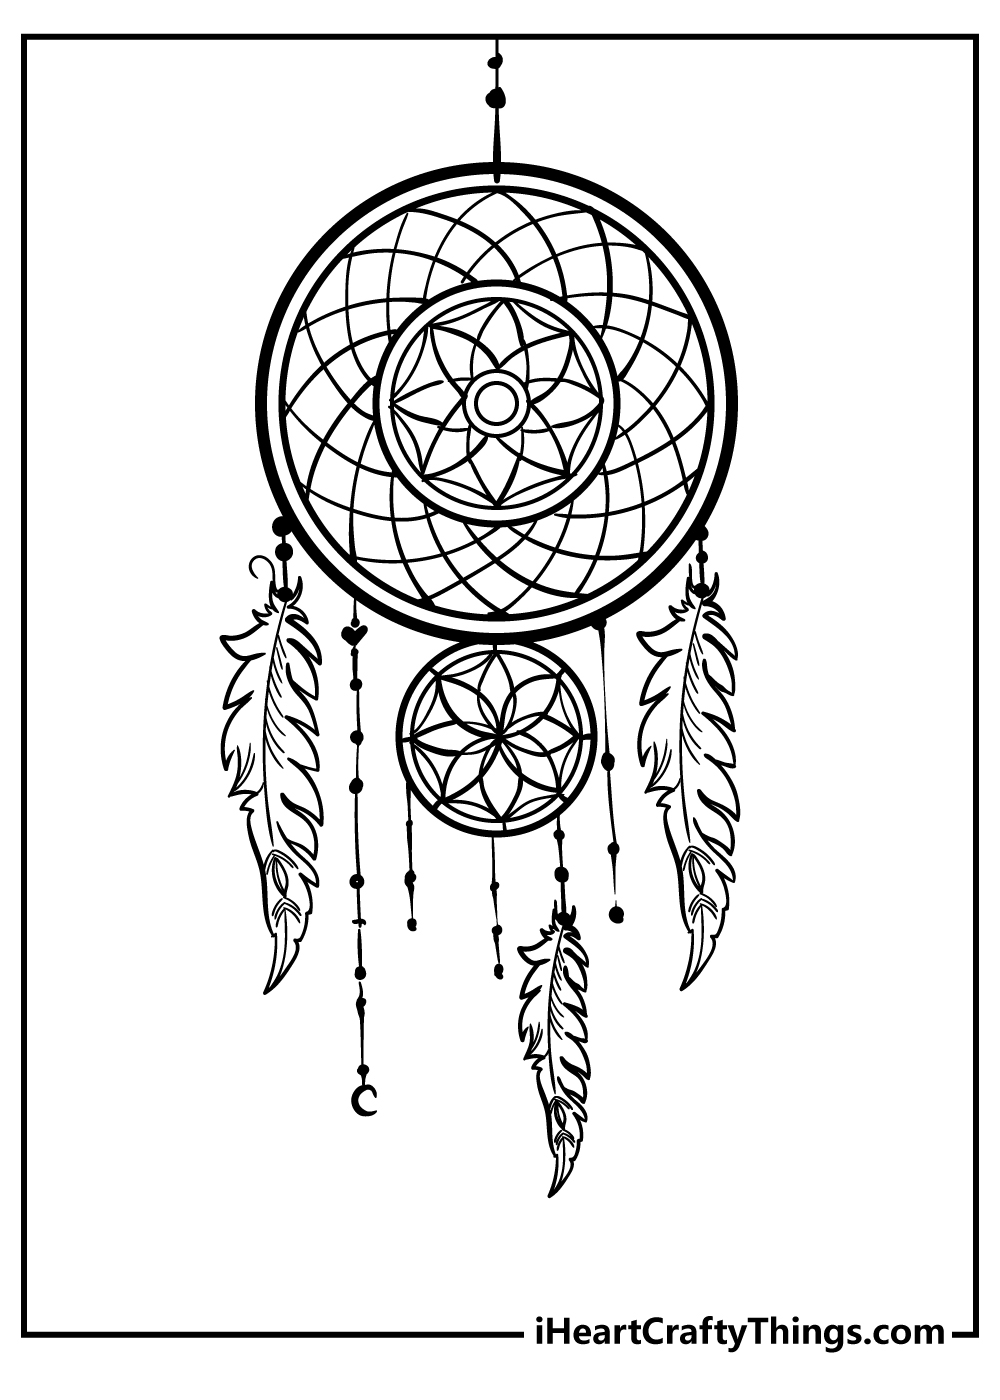 Dream catcher coloring pages free printables